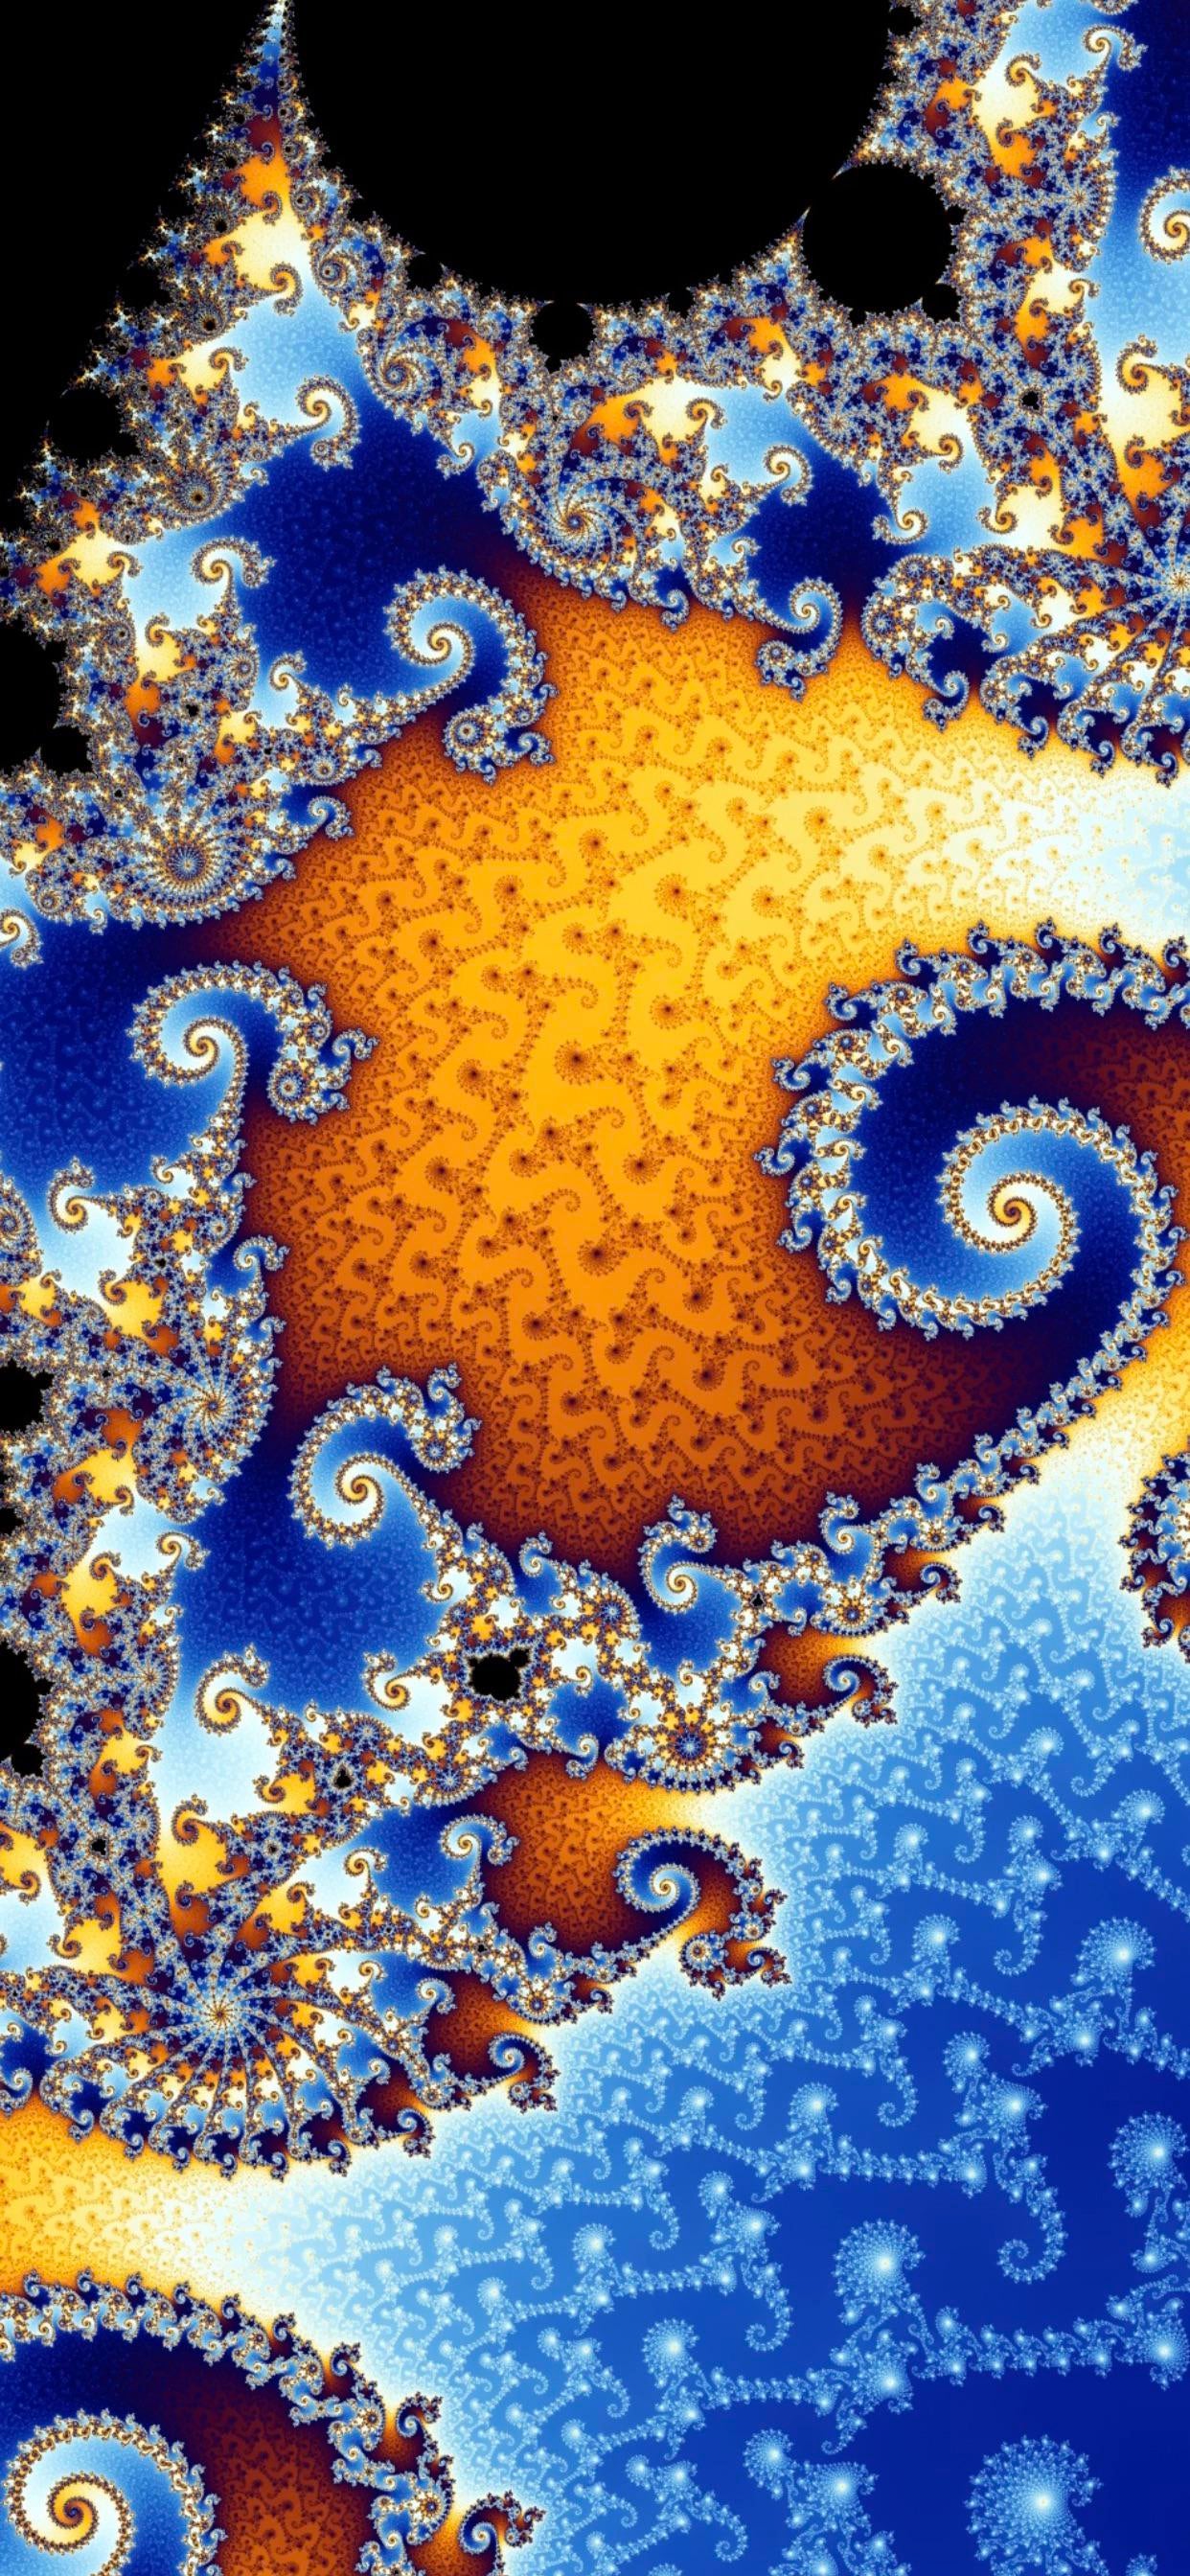 Part of the mandelbrot set great wallpaper for hiding the iphone notch rphonewallpapers